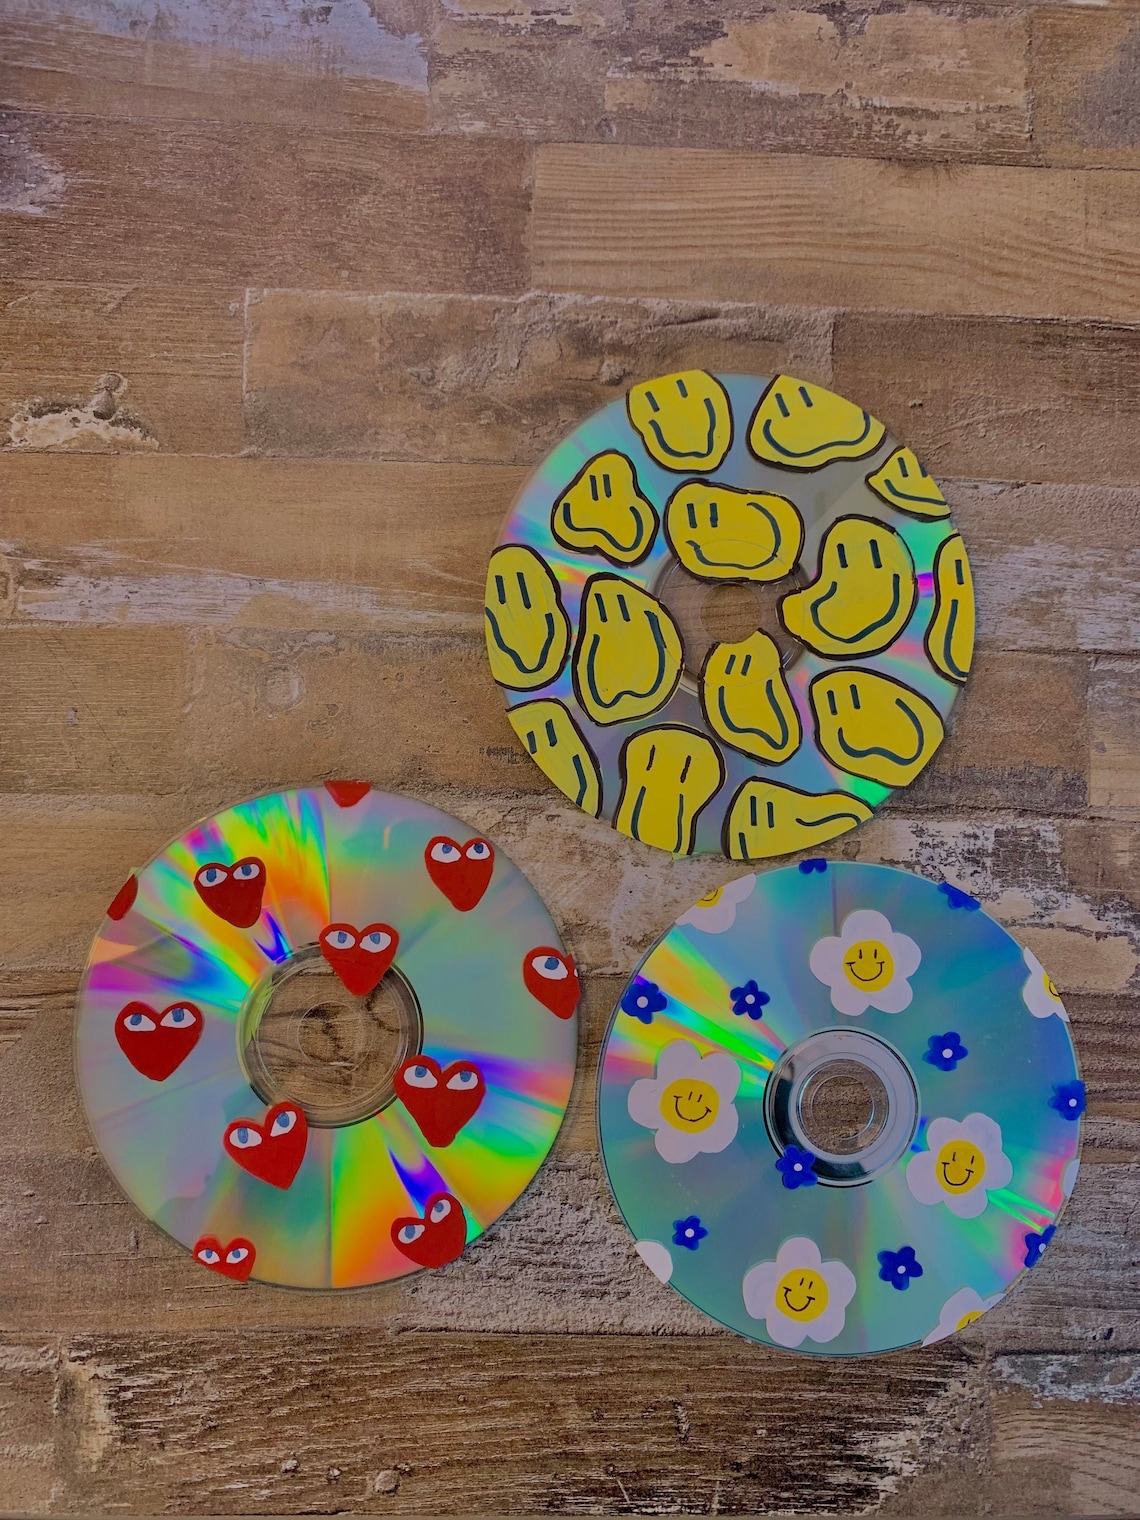 Painted CDs Flowers Melting Smiley Faces Hearts | Etsy